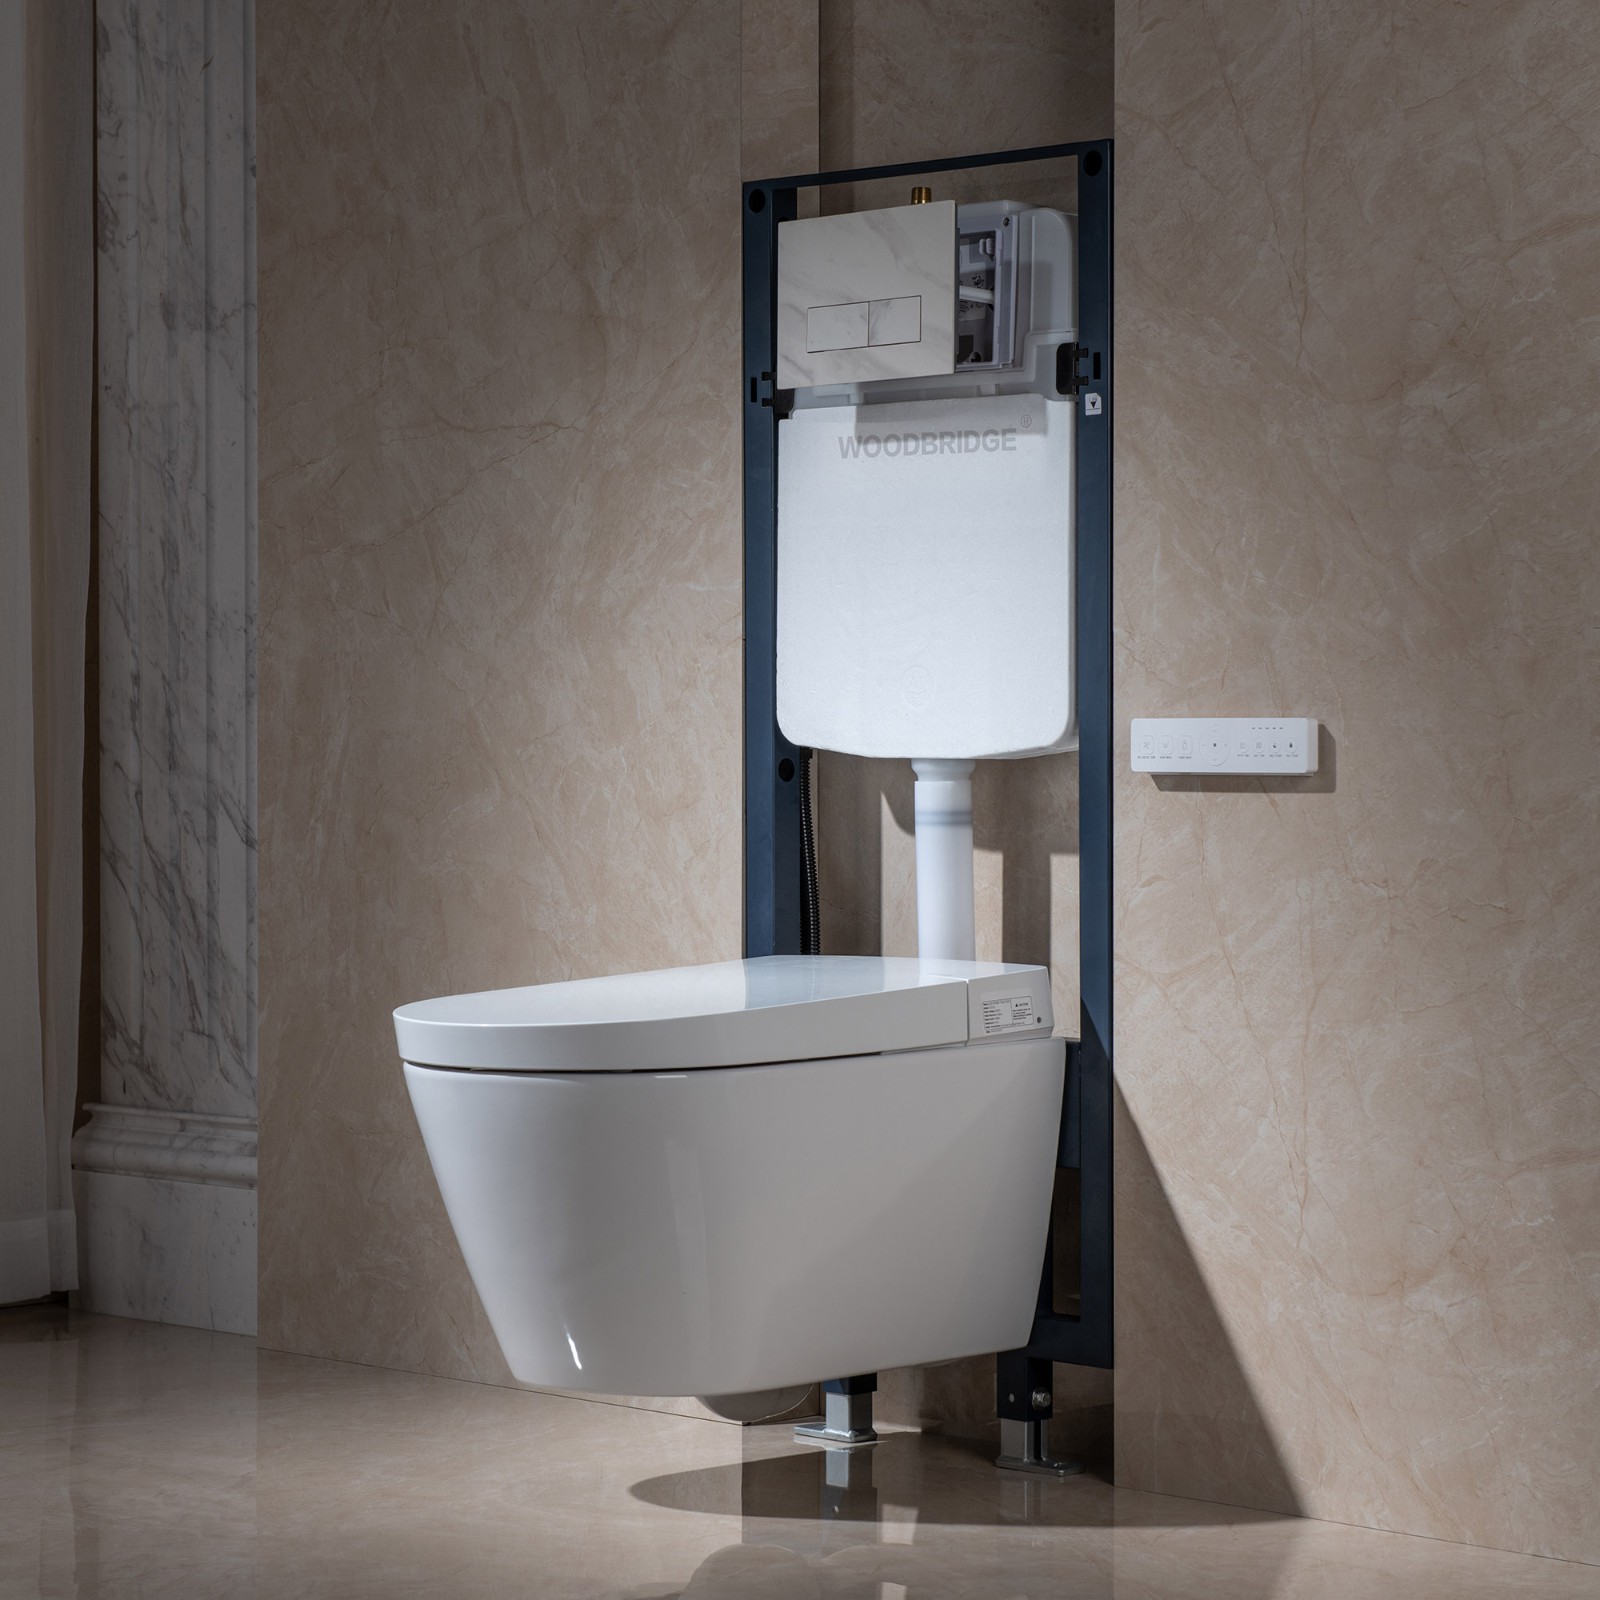  WOODBRIDGE  Intelligent Compact Elongated Dual-flush wall hung toilet with Bidet Wash Function, Heated Seat & Dryer. Matching Concealed Tank system and White Marble Stone Slim Flush Plates Included.LT611 + SWHT611+FP611-WH_554